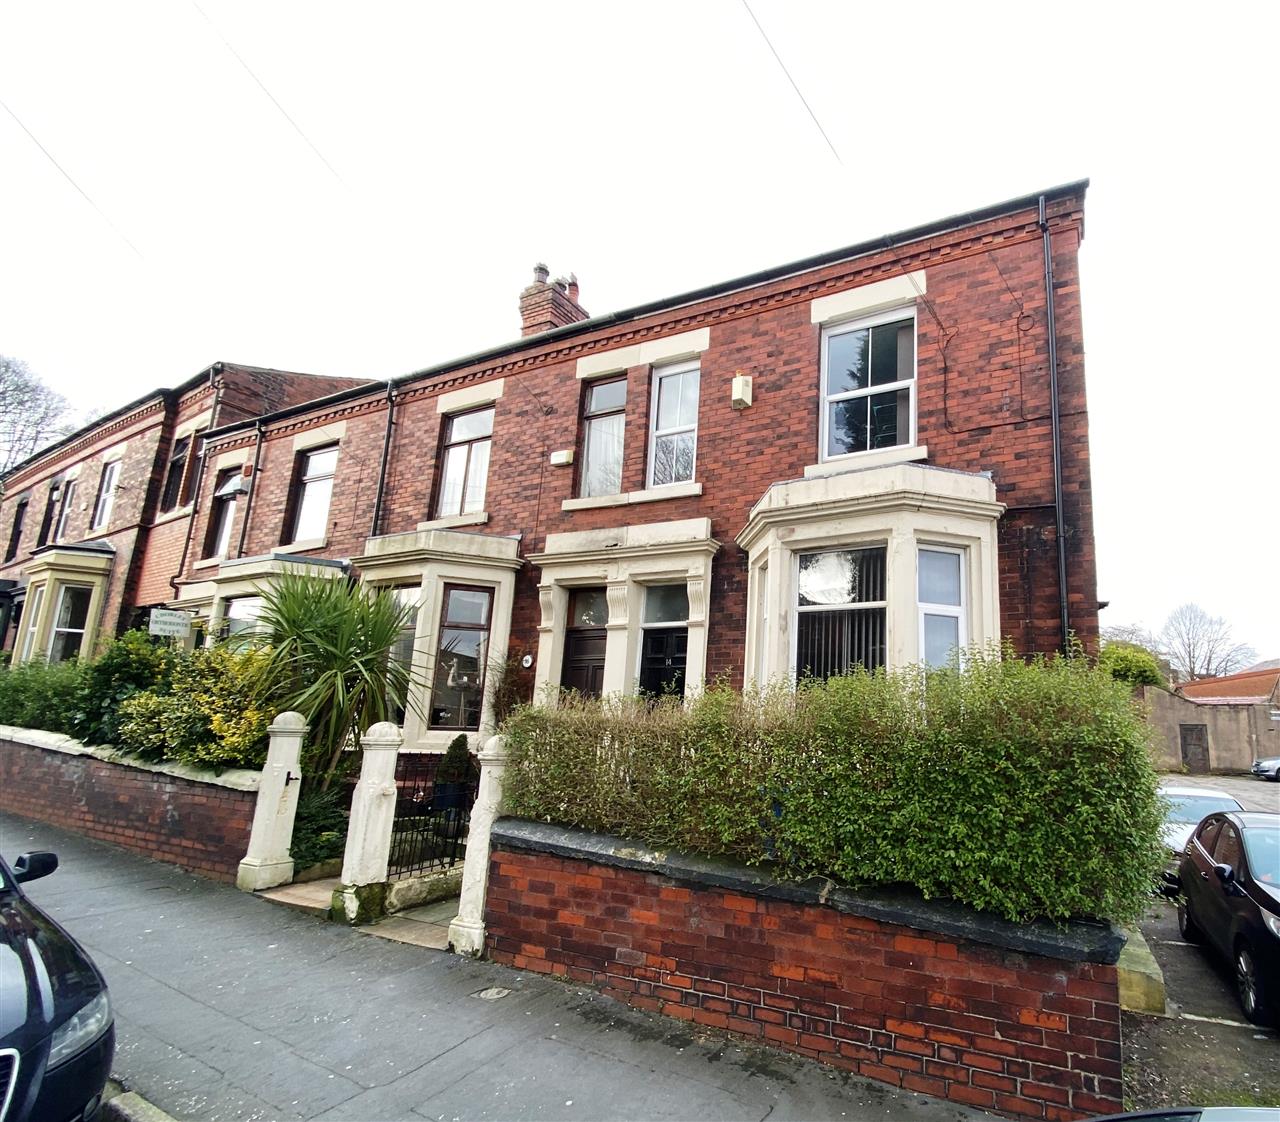 2 bed apartment to rent in A West Street, Chorley, Chorley, PR7